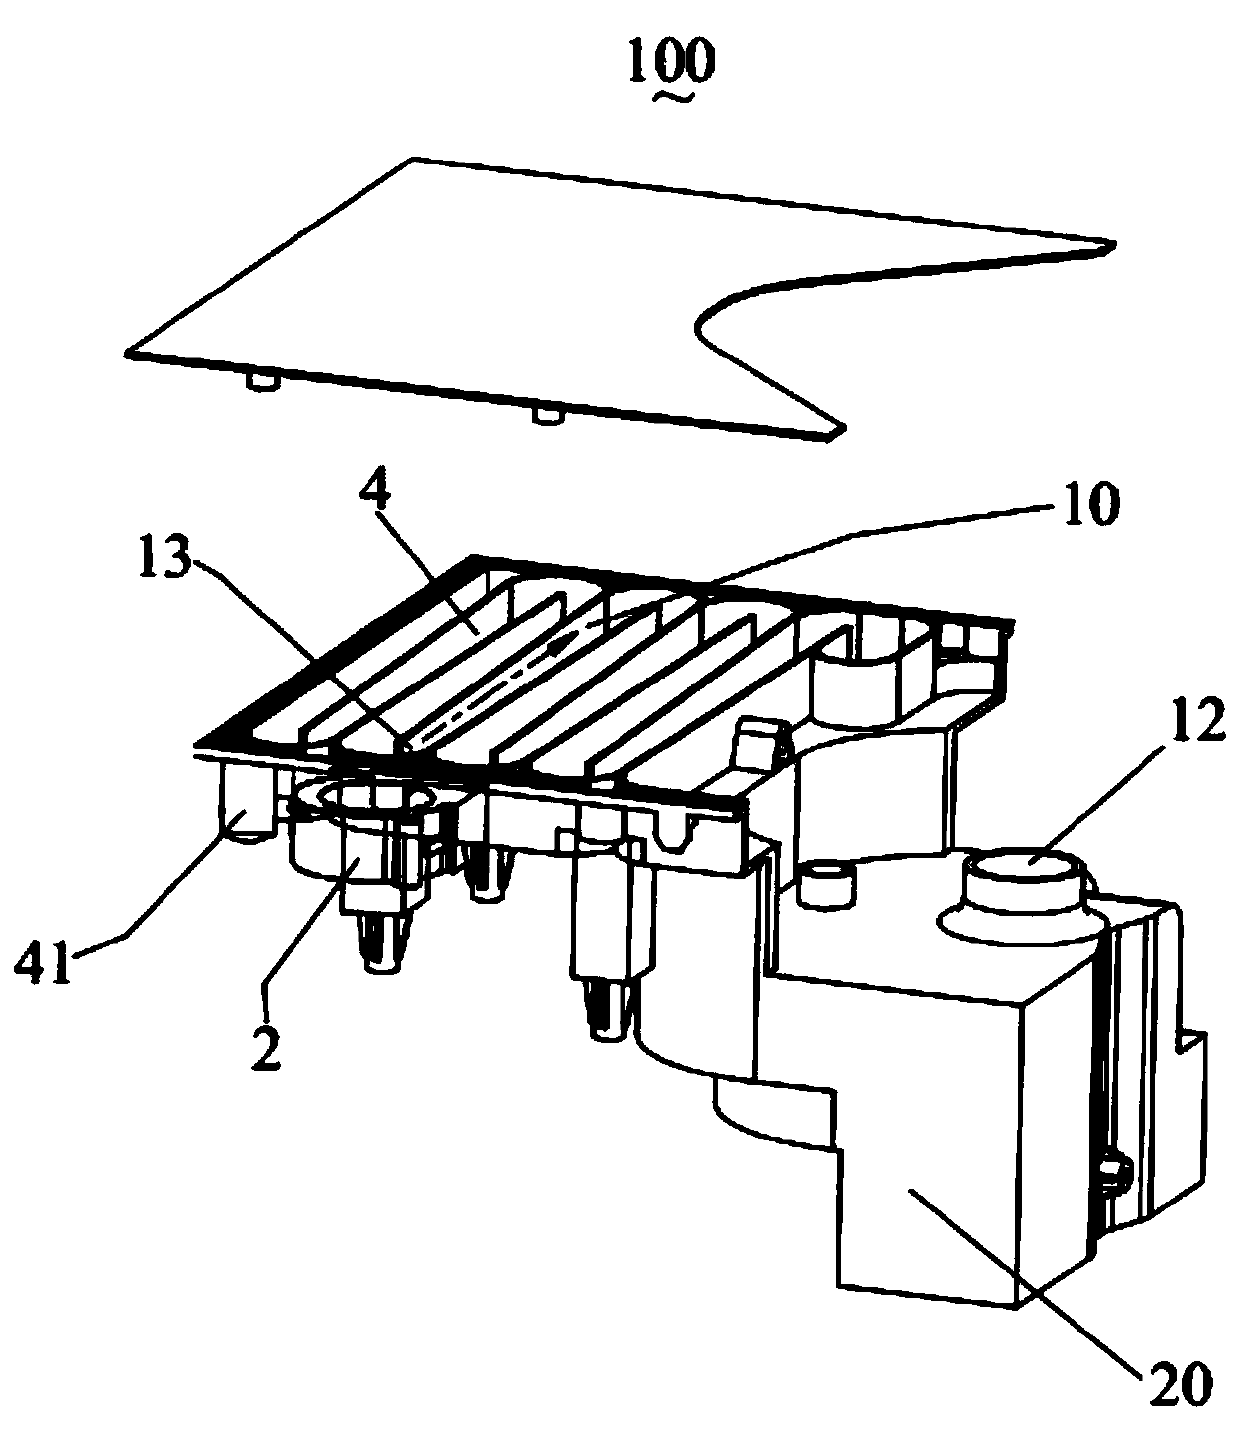 Steam condensation device and cooking utensil